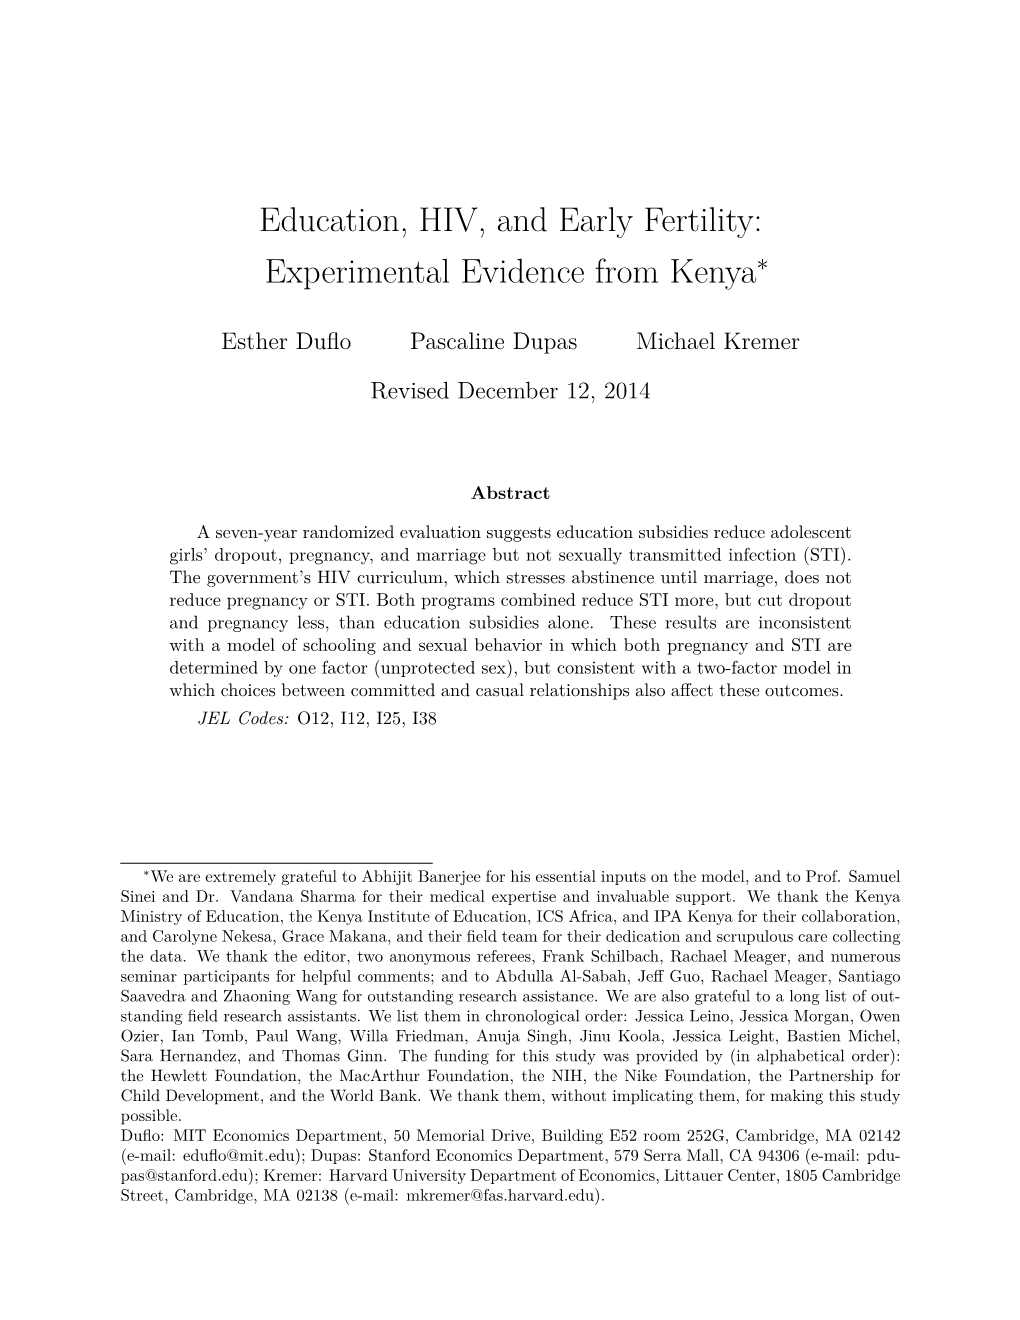 Education, HIV and Early Fertility: Experimental Evidence from Kenya